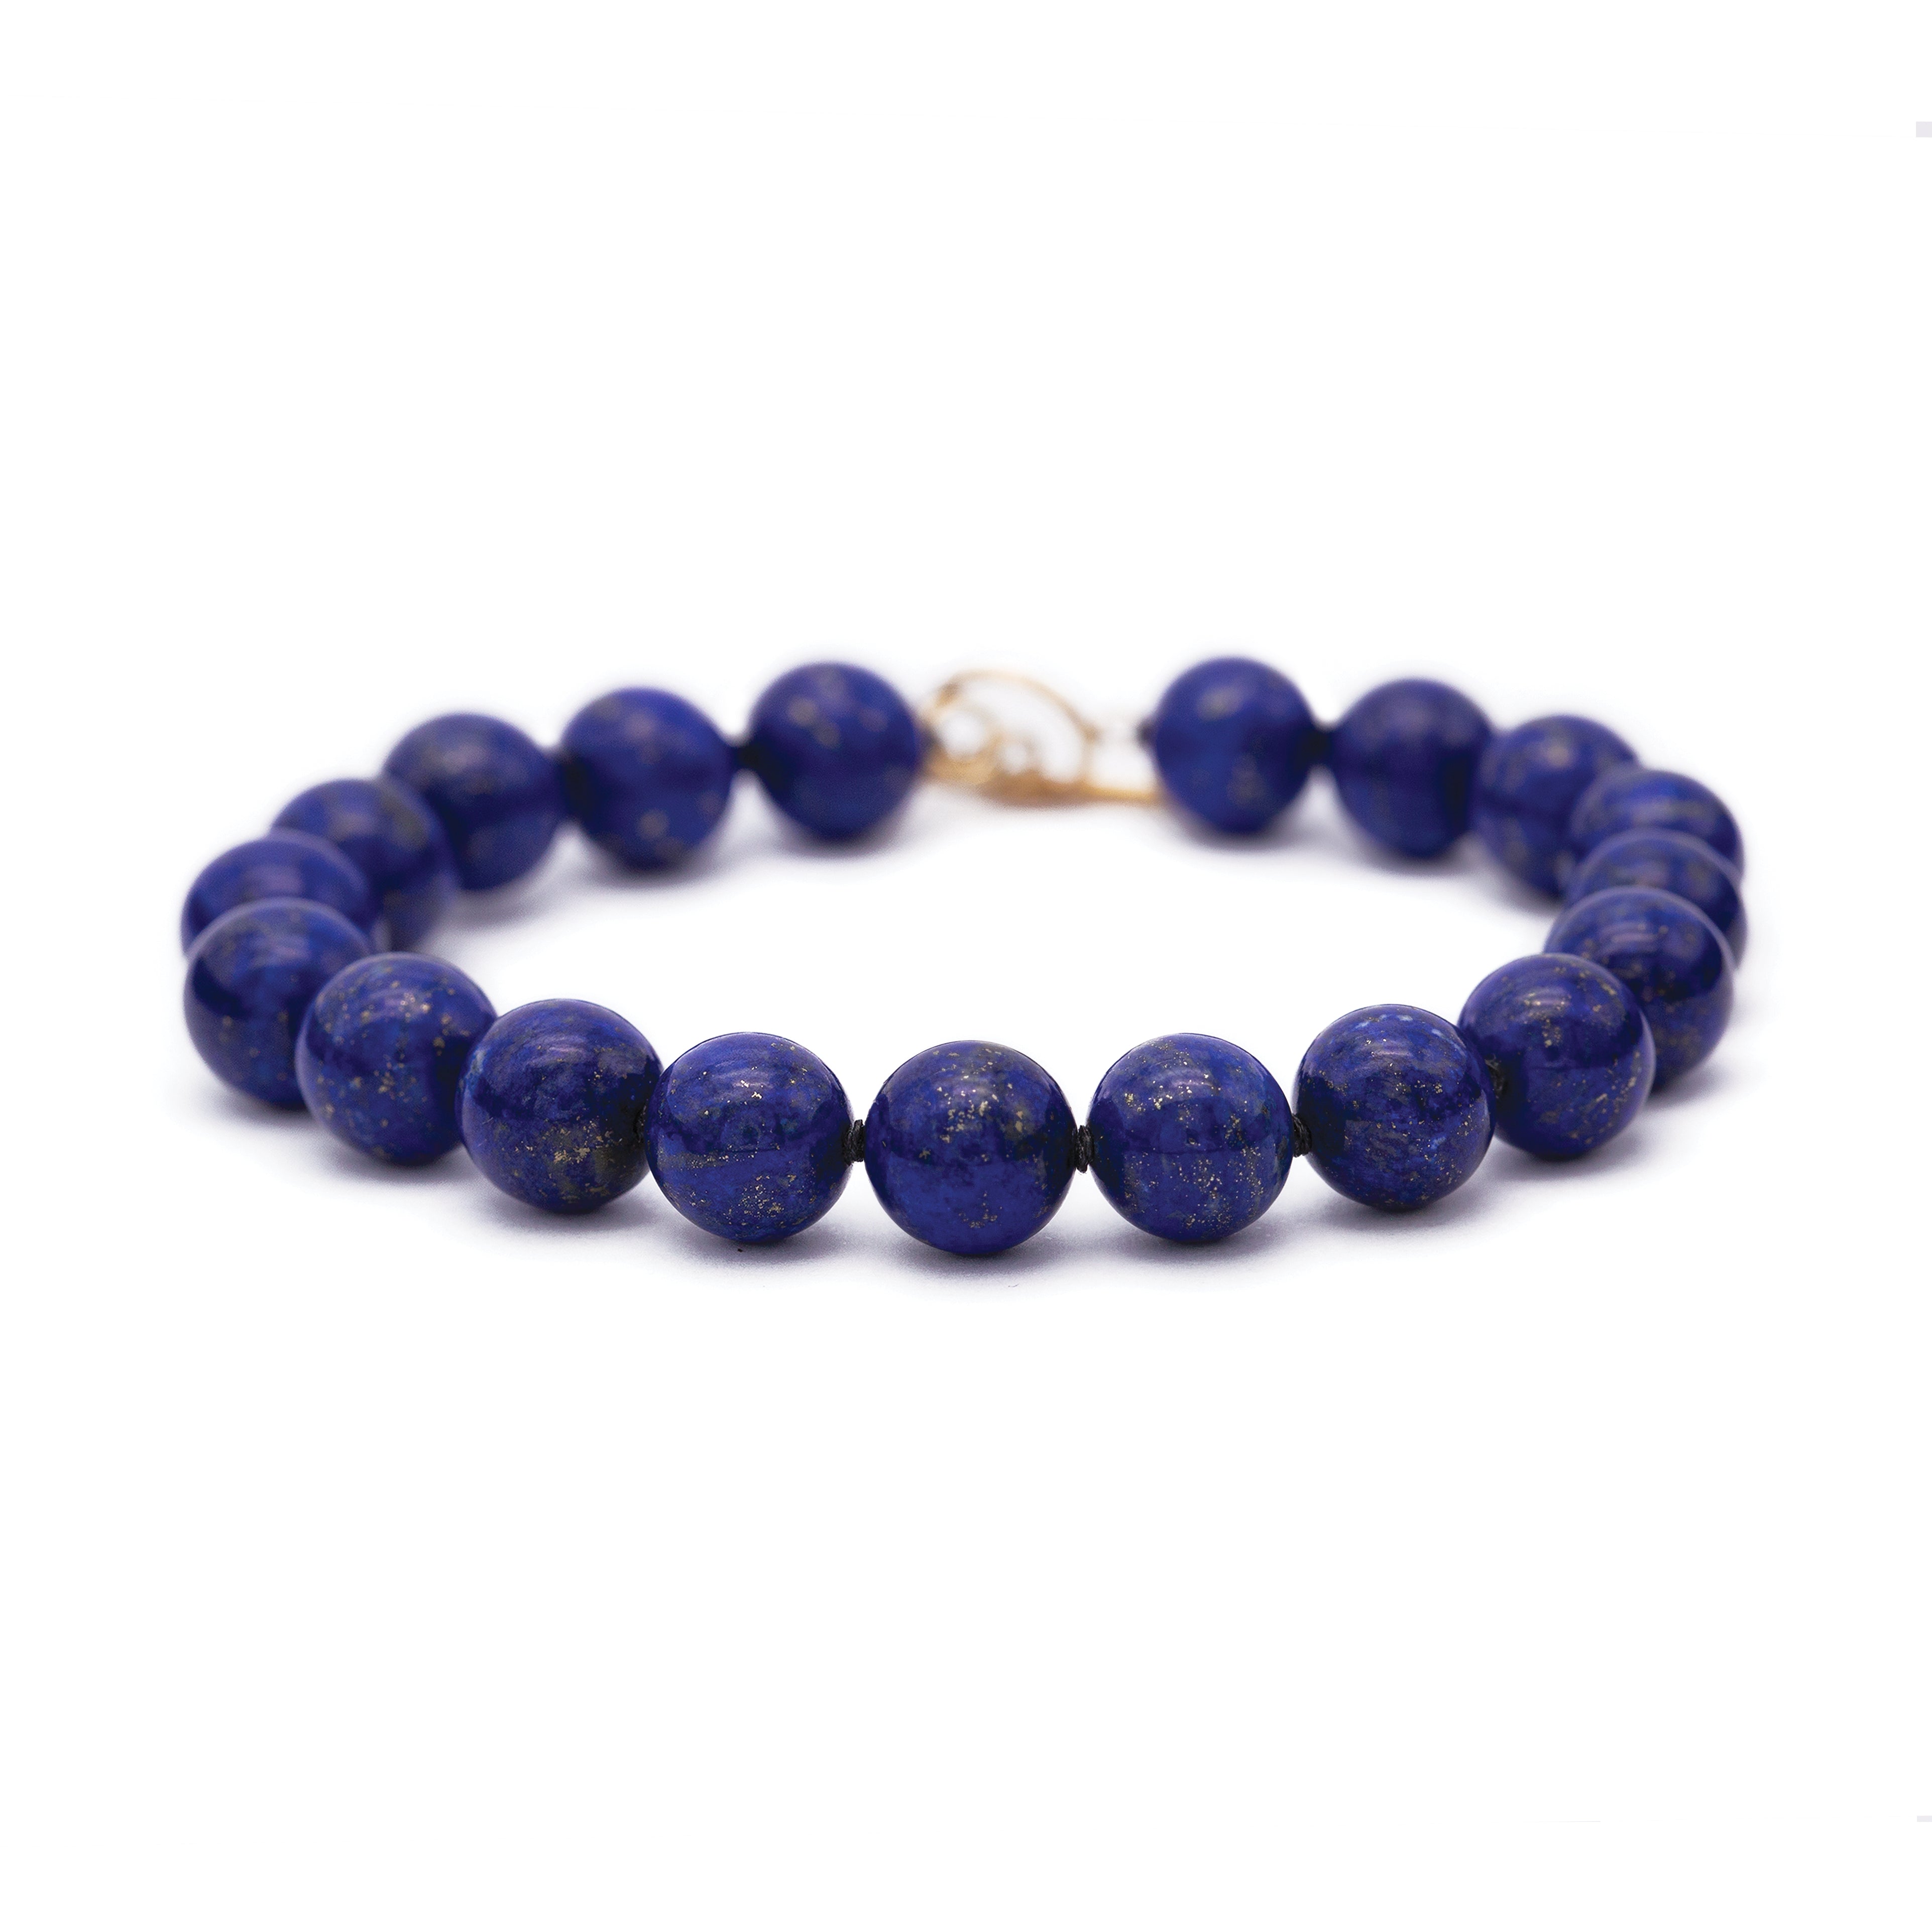 Crystal healing Lapis Lazuli Bracelet known for harmonizing the heart and mind